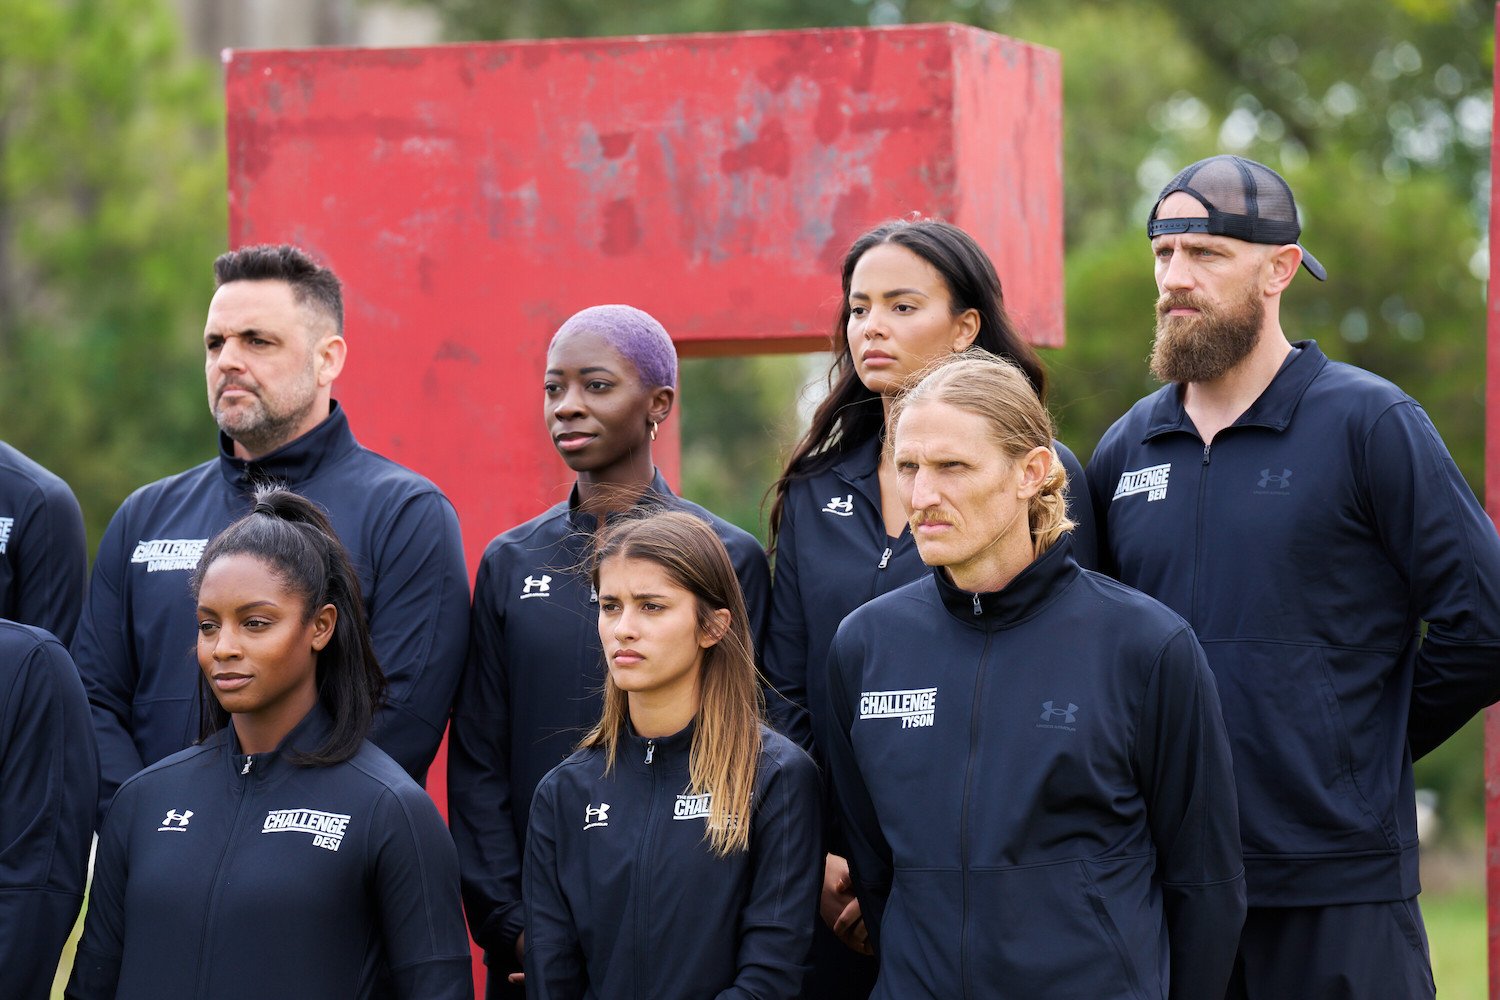 'The Challenge: USA' cast standing side by side wearing blue uniforms